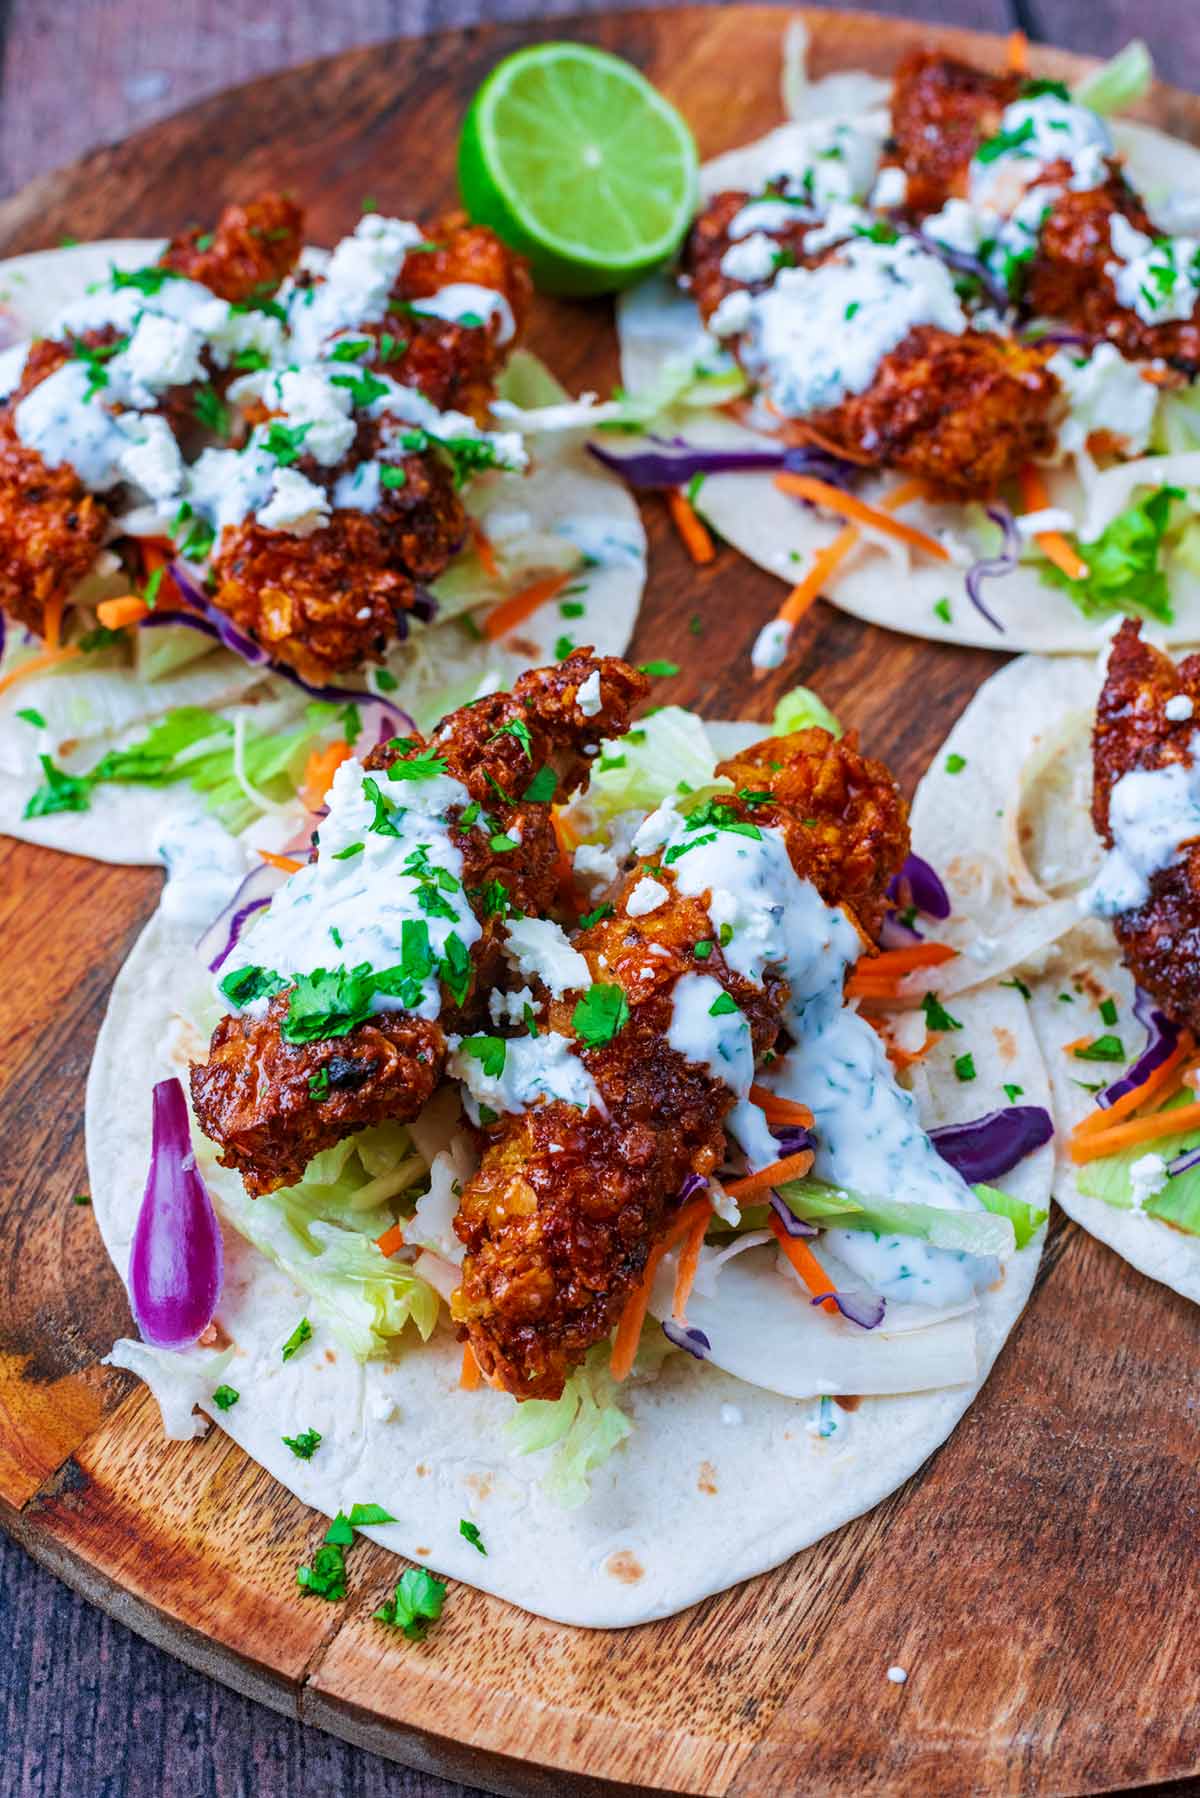 Four tacos made up of salad, crispy chicken tenders, creamy sauce and cheese.